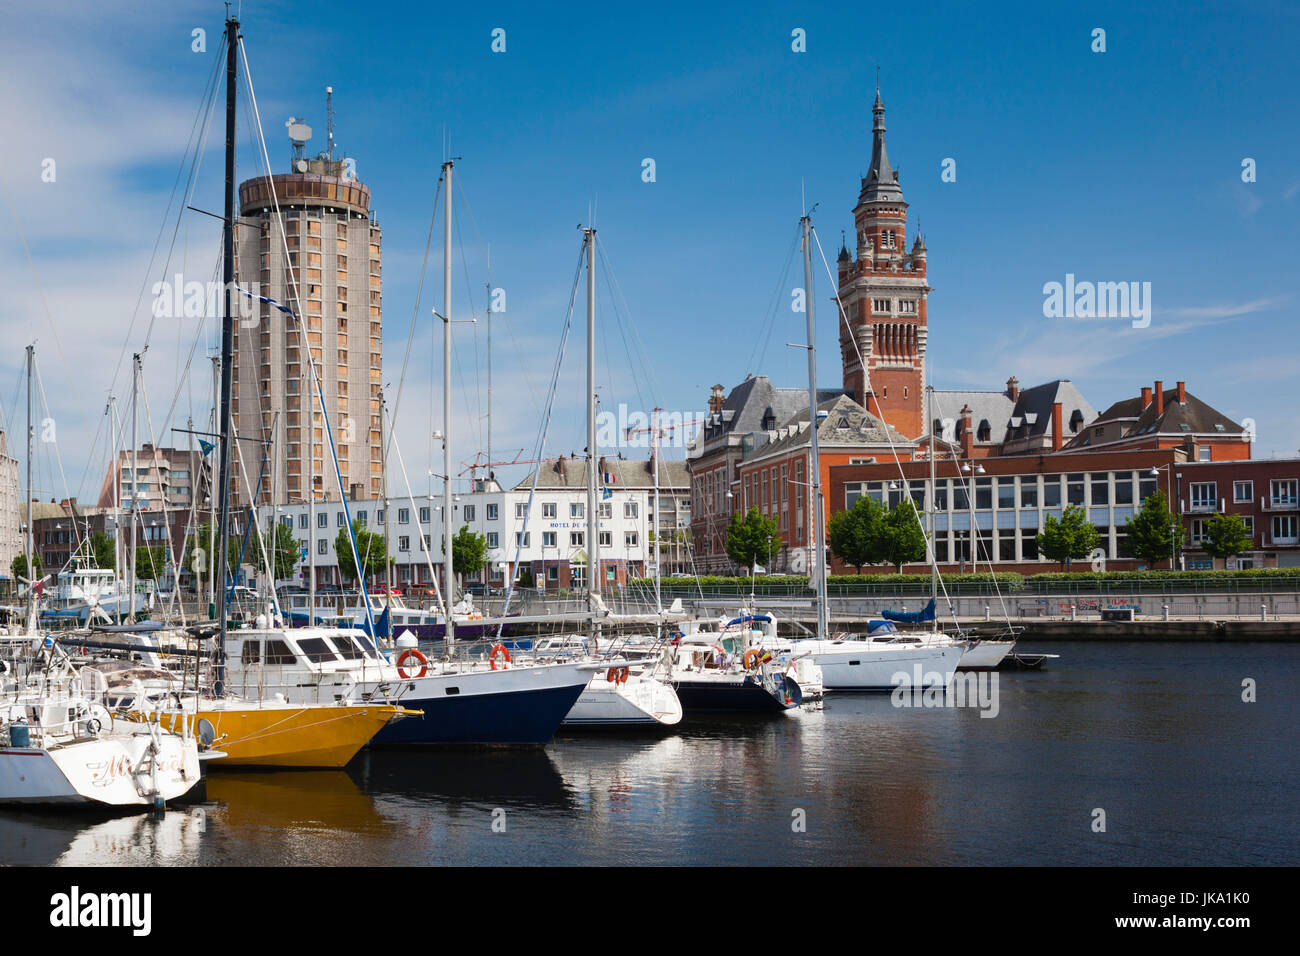 France, Nord-Pas de Calais Region, Nord Department, French Flanders Area, Dunkerque, Bassin du Commerce marina and town hall tower Stock Photo